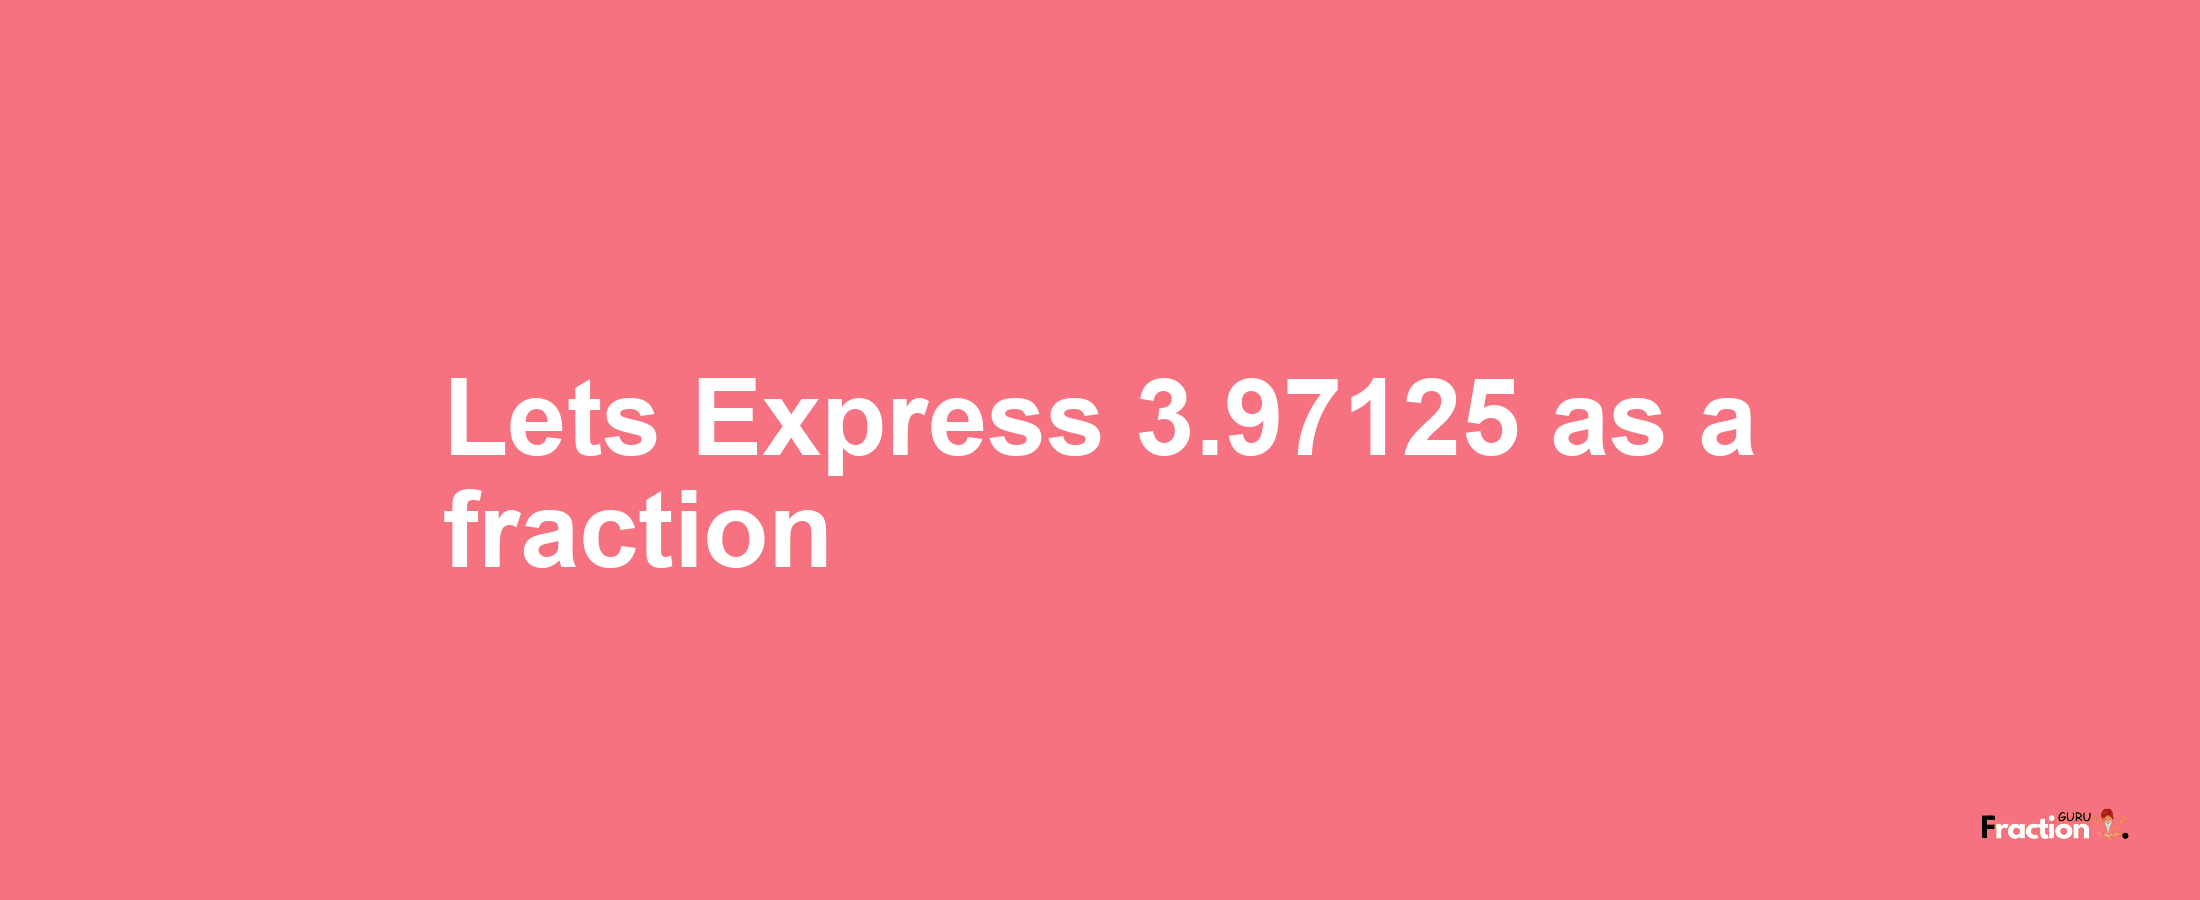 Lets Express 3.97125 as afraction